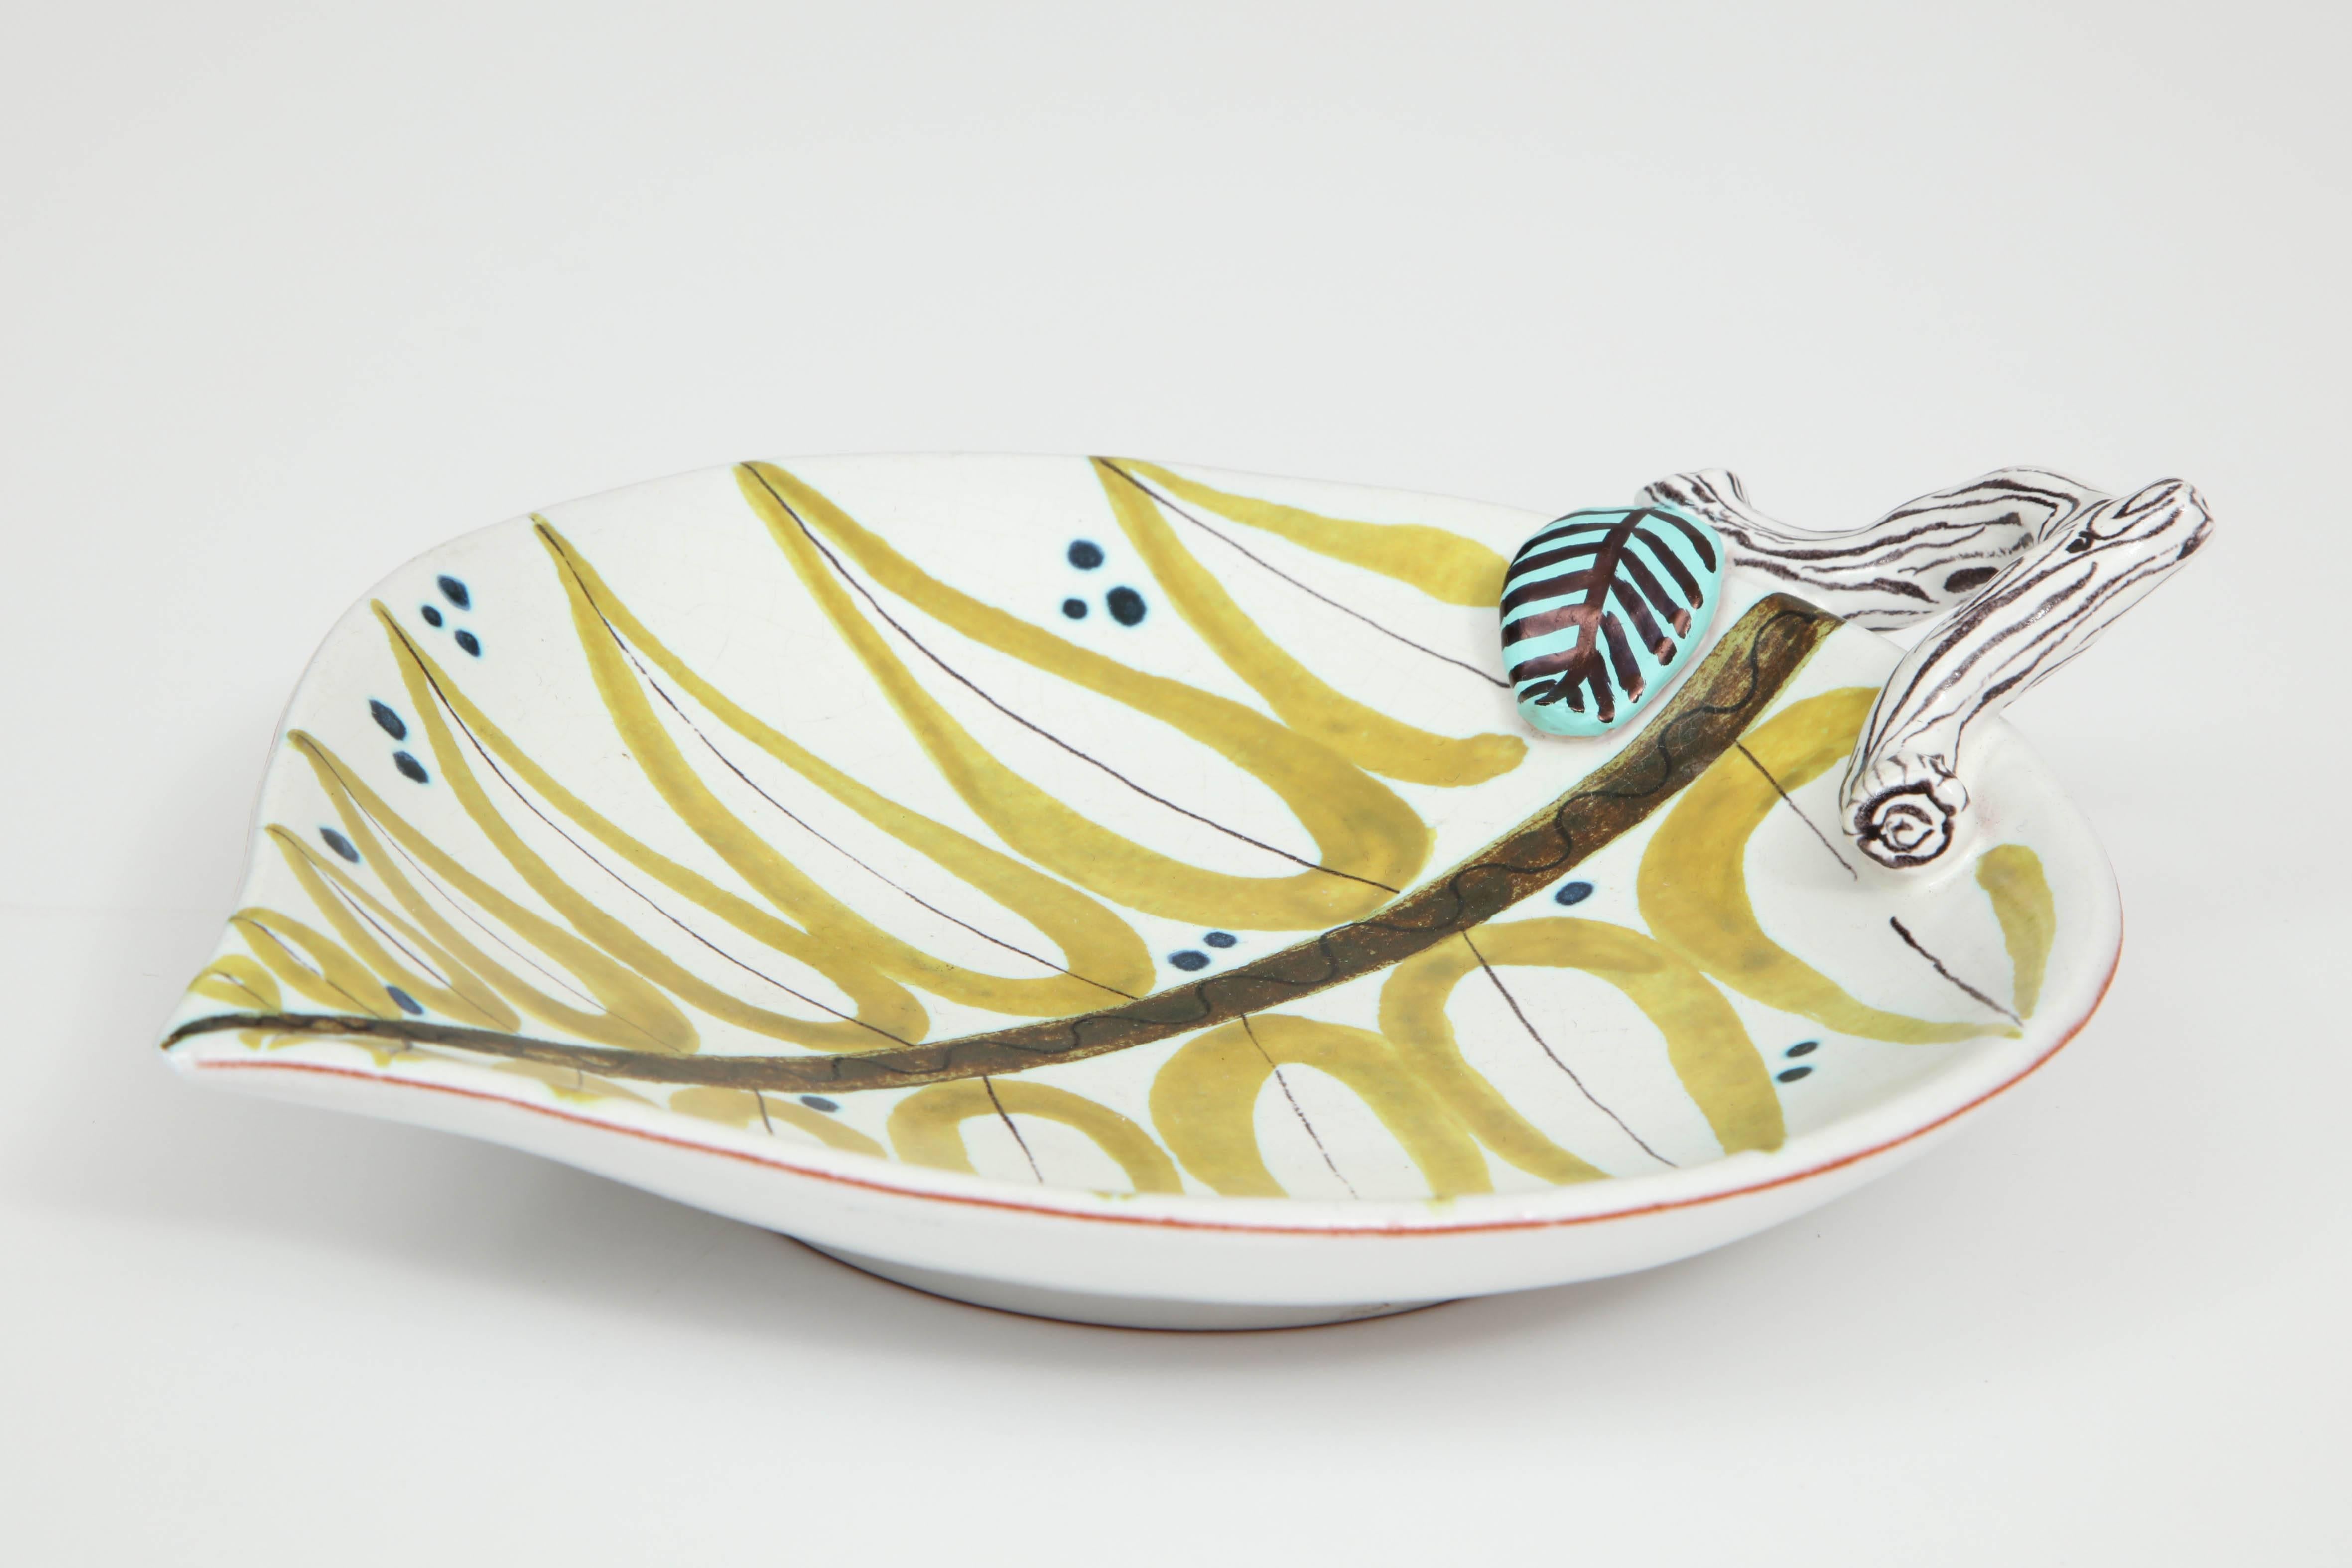 Faience Pottery Bowl by Stig Lindberg, Sweden, circa 1950